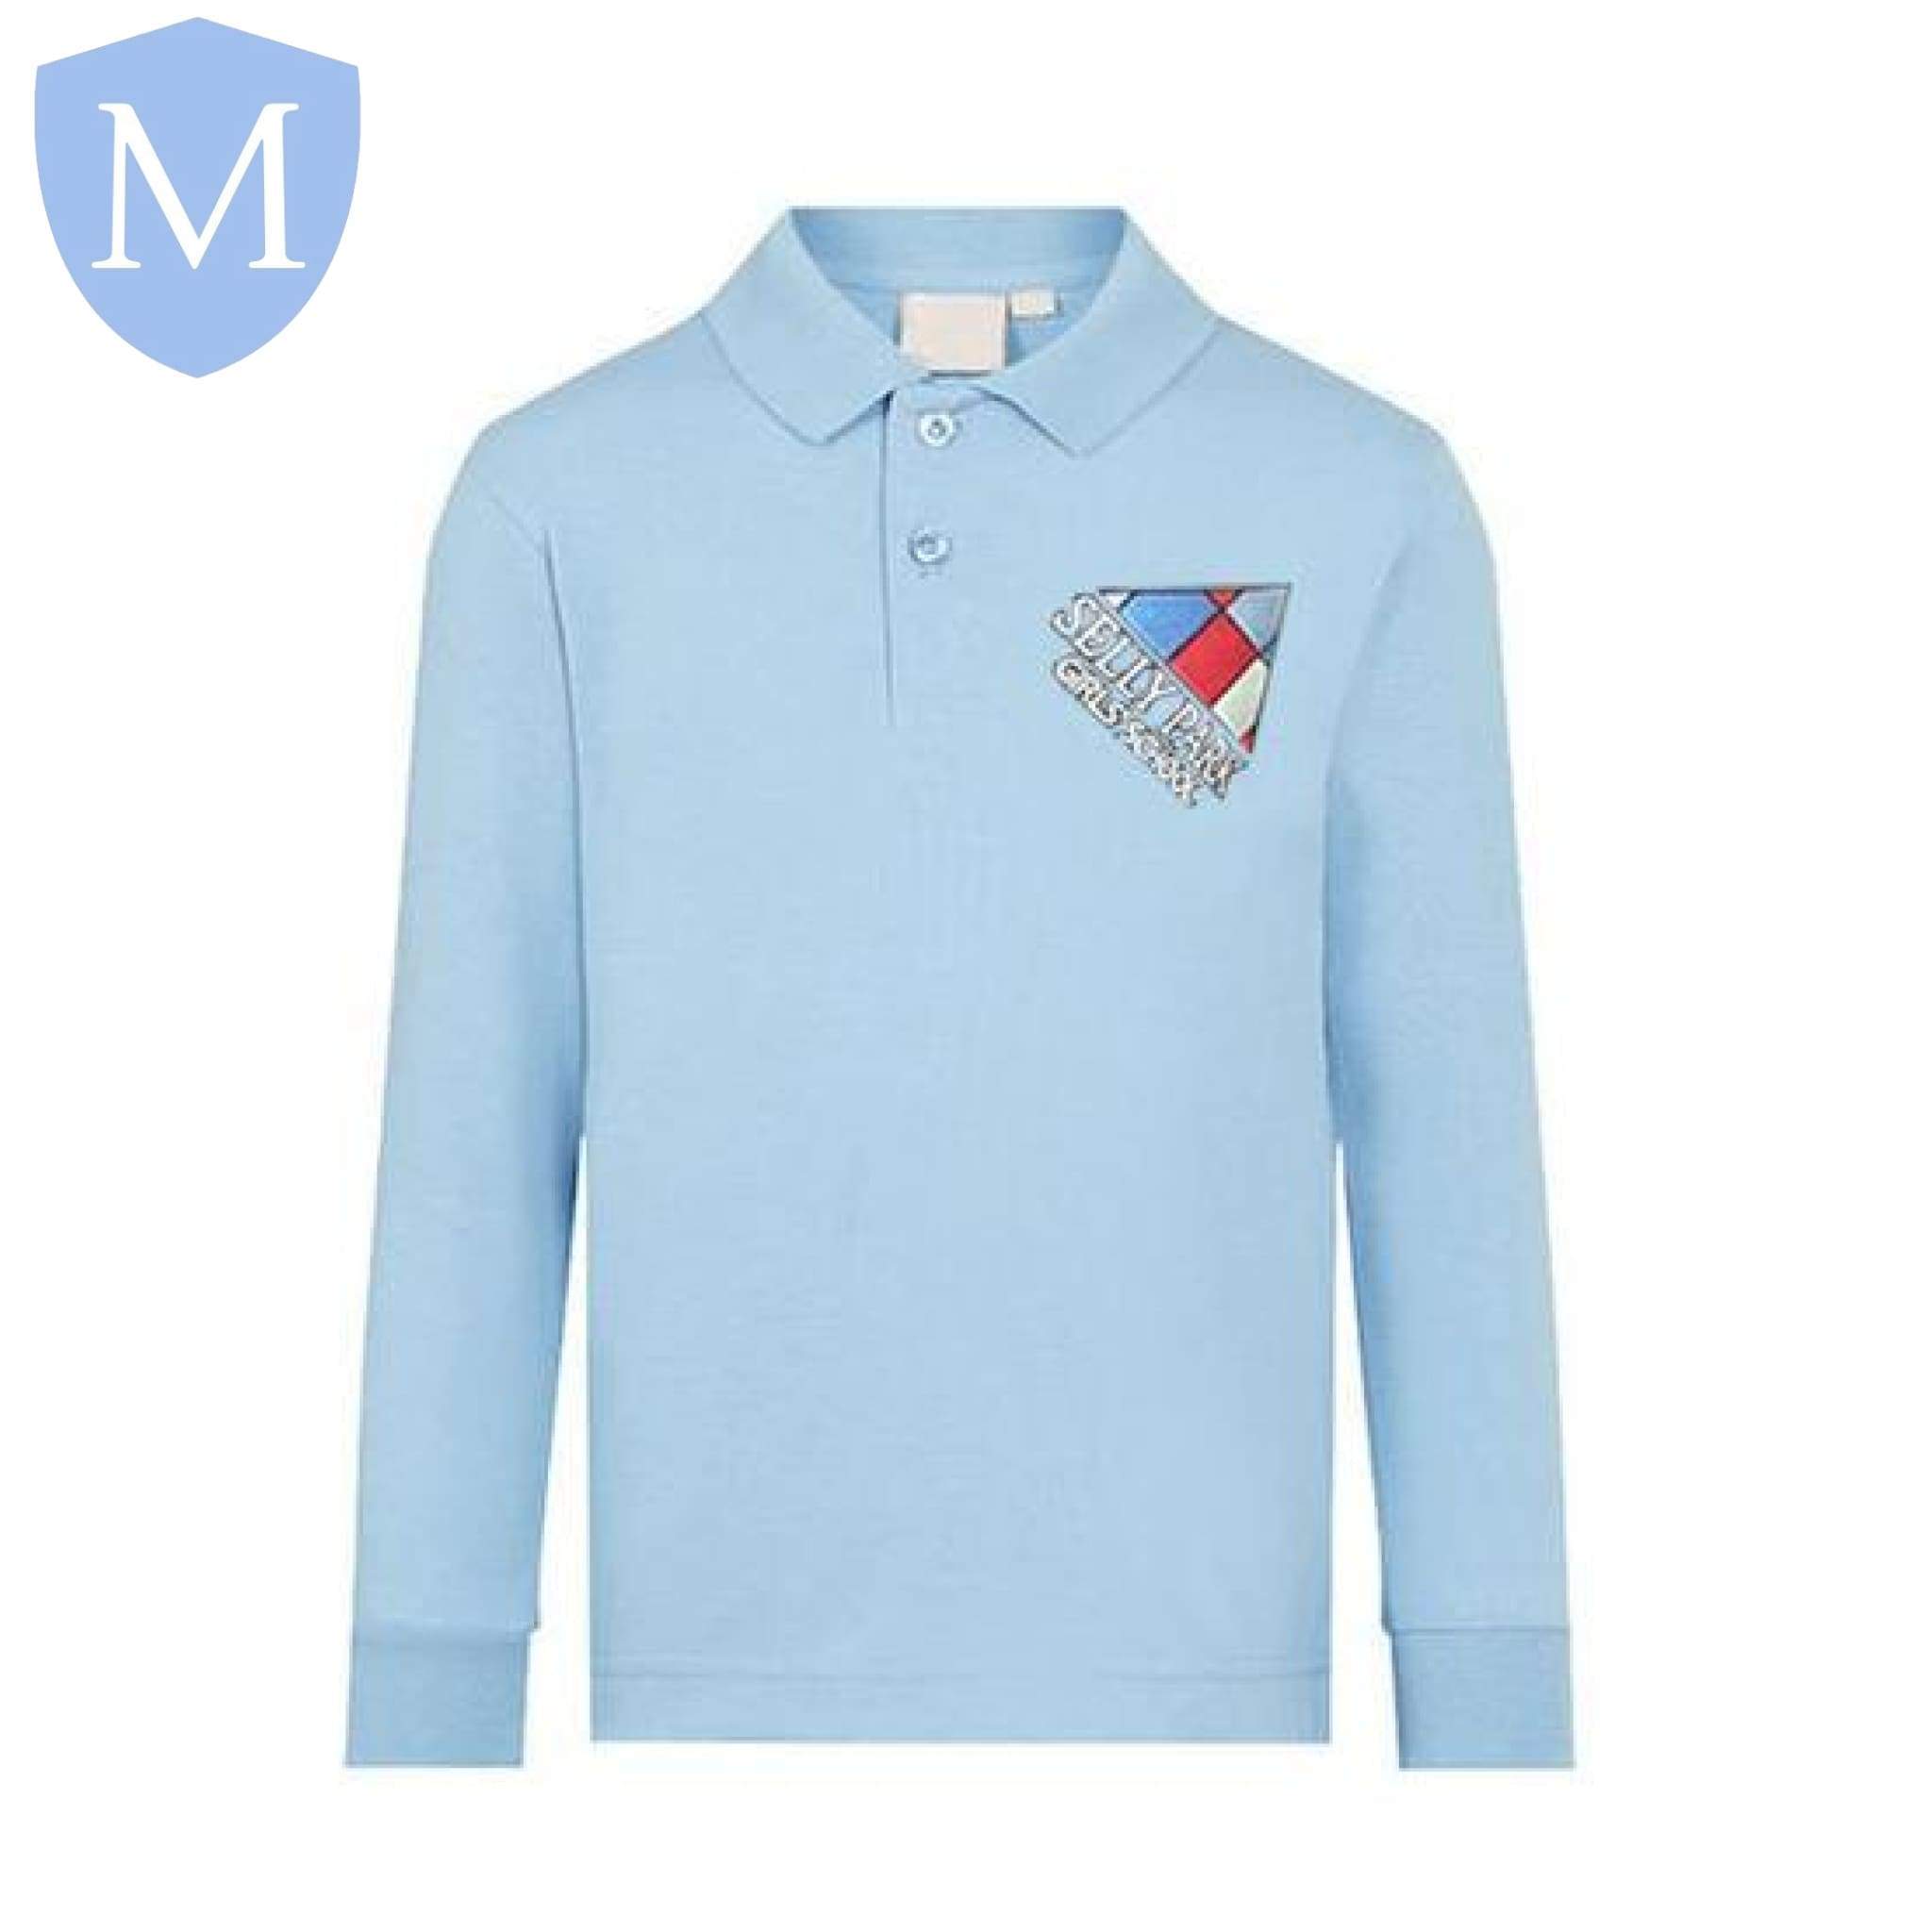 Selly Park Long Sleeved Polo Shirt 7-8 Years,11-12 Years,13 Years,2XL,9-10 Years,Large,Medium,Small,X-Large